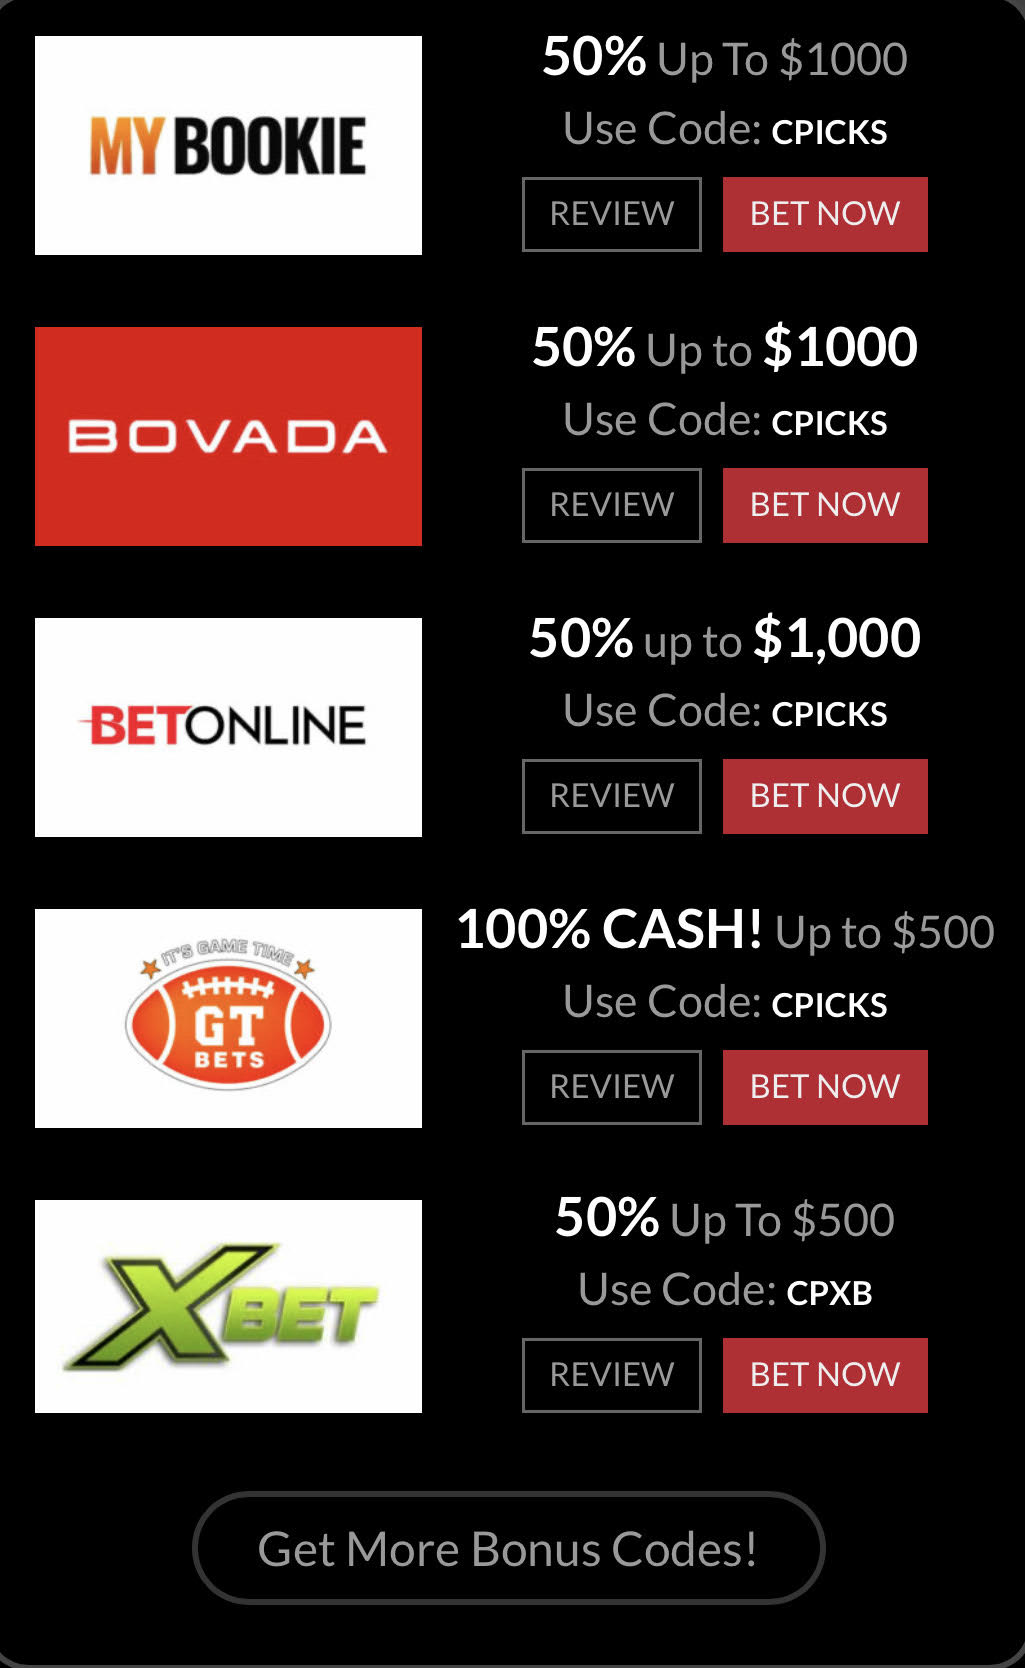 Legal USA Betting Sites Online